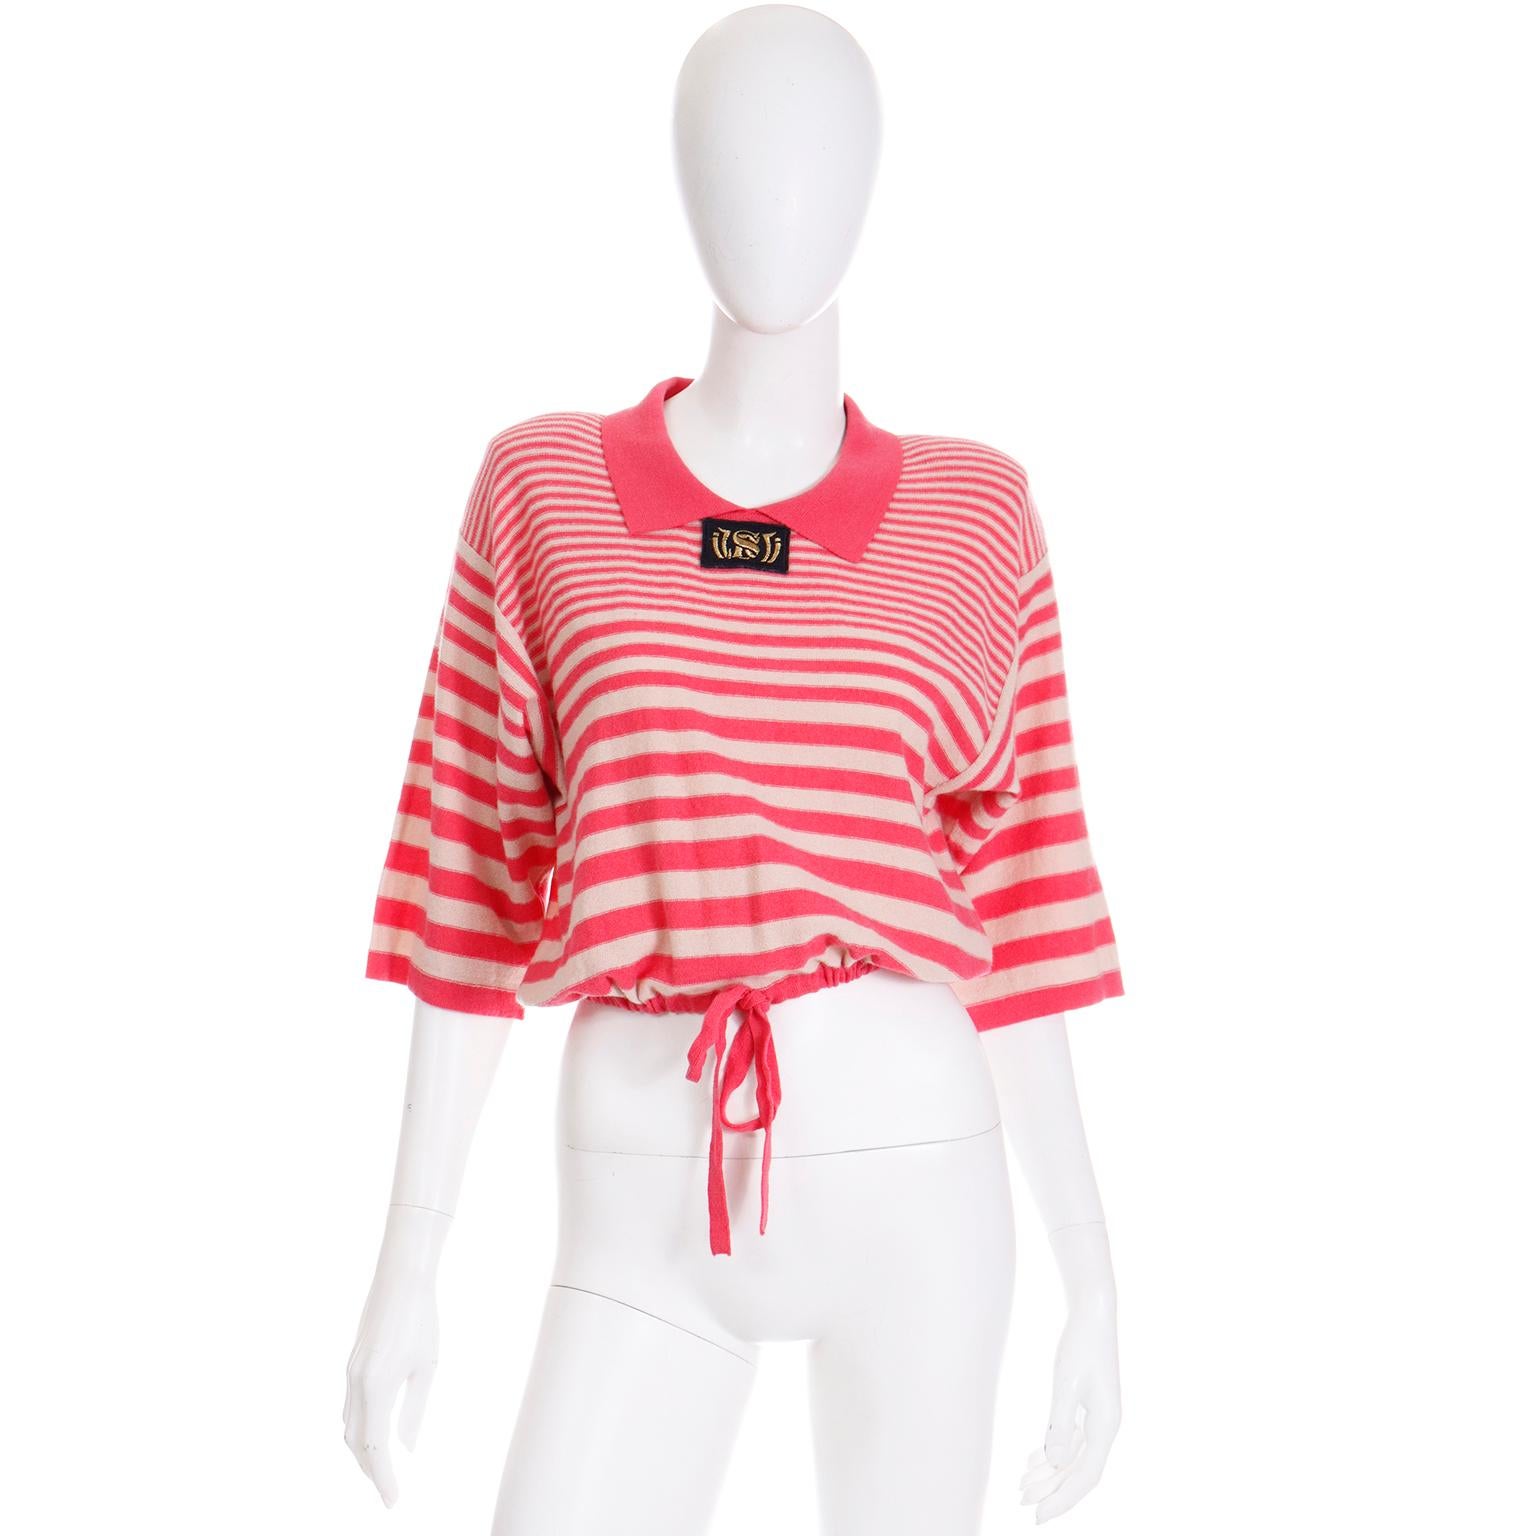 This vintage late 1980's Sonia Rykiel Paris Wool striped oversized top is in a pale beige with bright pink horizontal stripes and a drawstring waist. This fabulous knit top has shoulder pads, 3/4 length sleeves, upper back buttons and a pointed pink